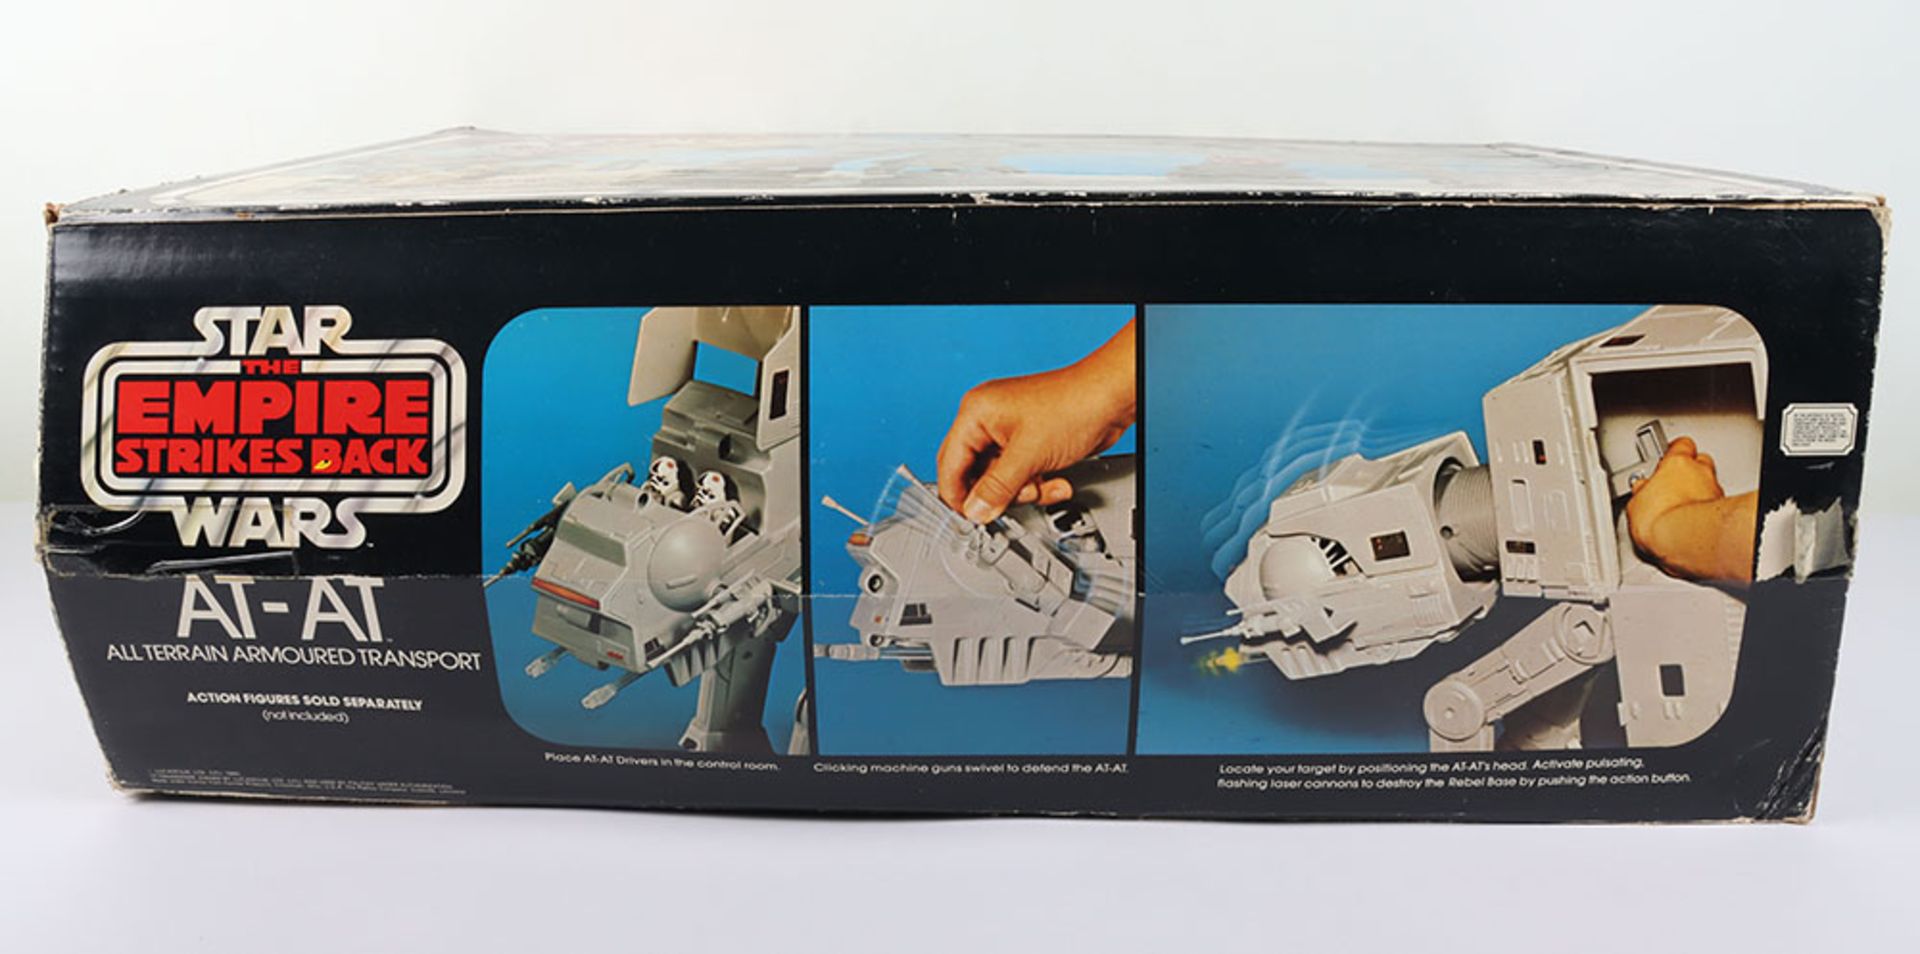 Palitoy Vintage Boxed Star Wars ‘The Empire Strikes Back’ AT-AT All Terrain Armoured Transport - Image 9 of 10